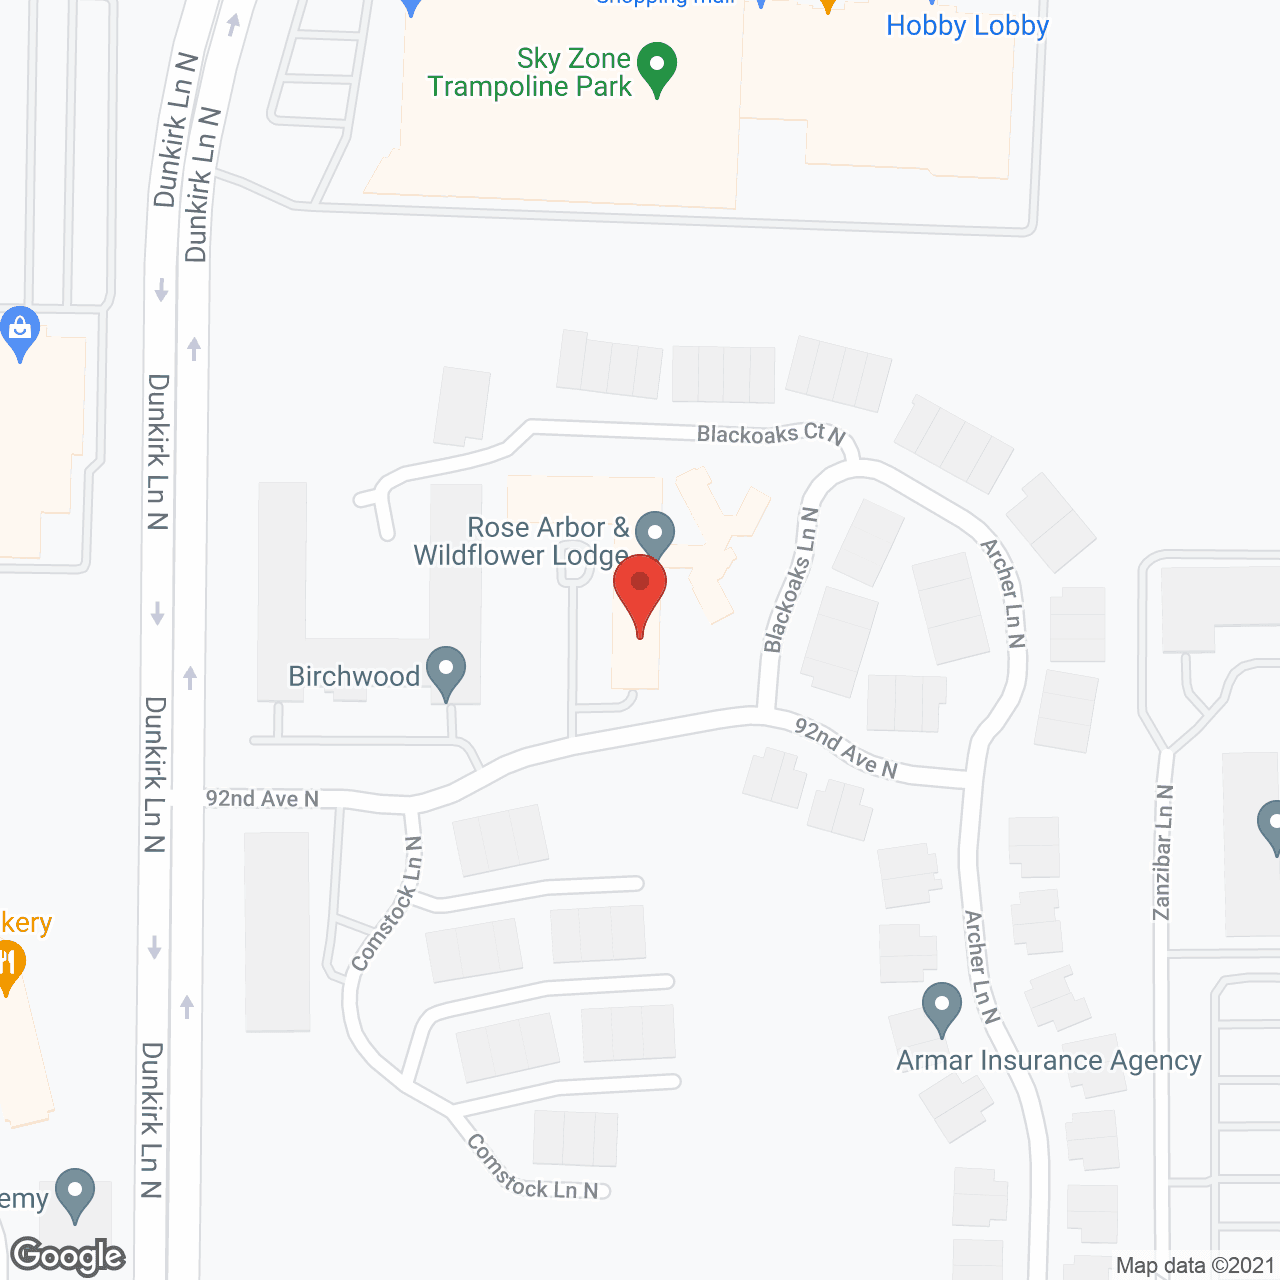 Rose Arbor and Wildflower Lodge in google map